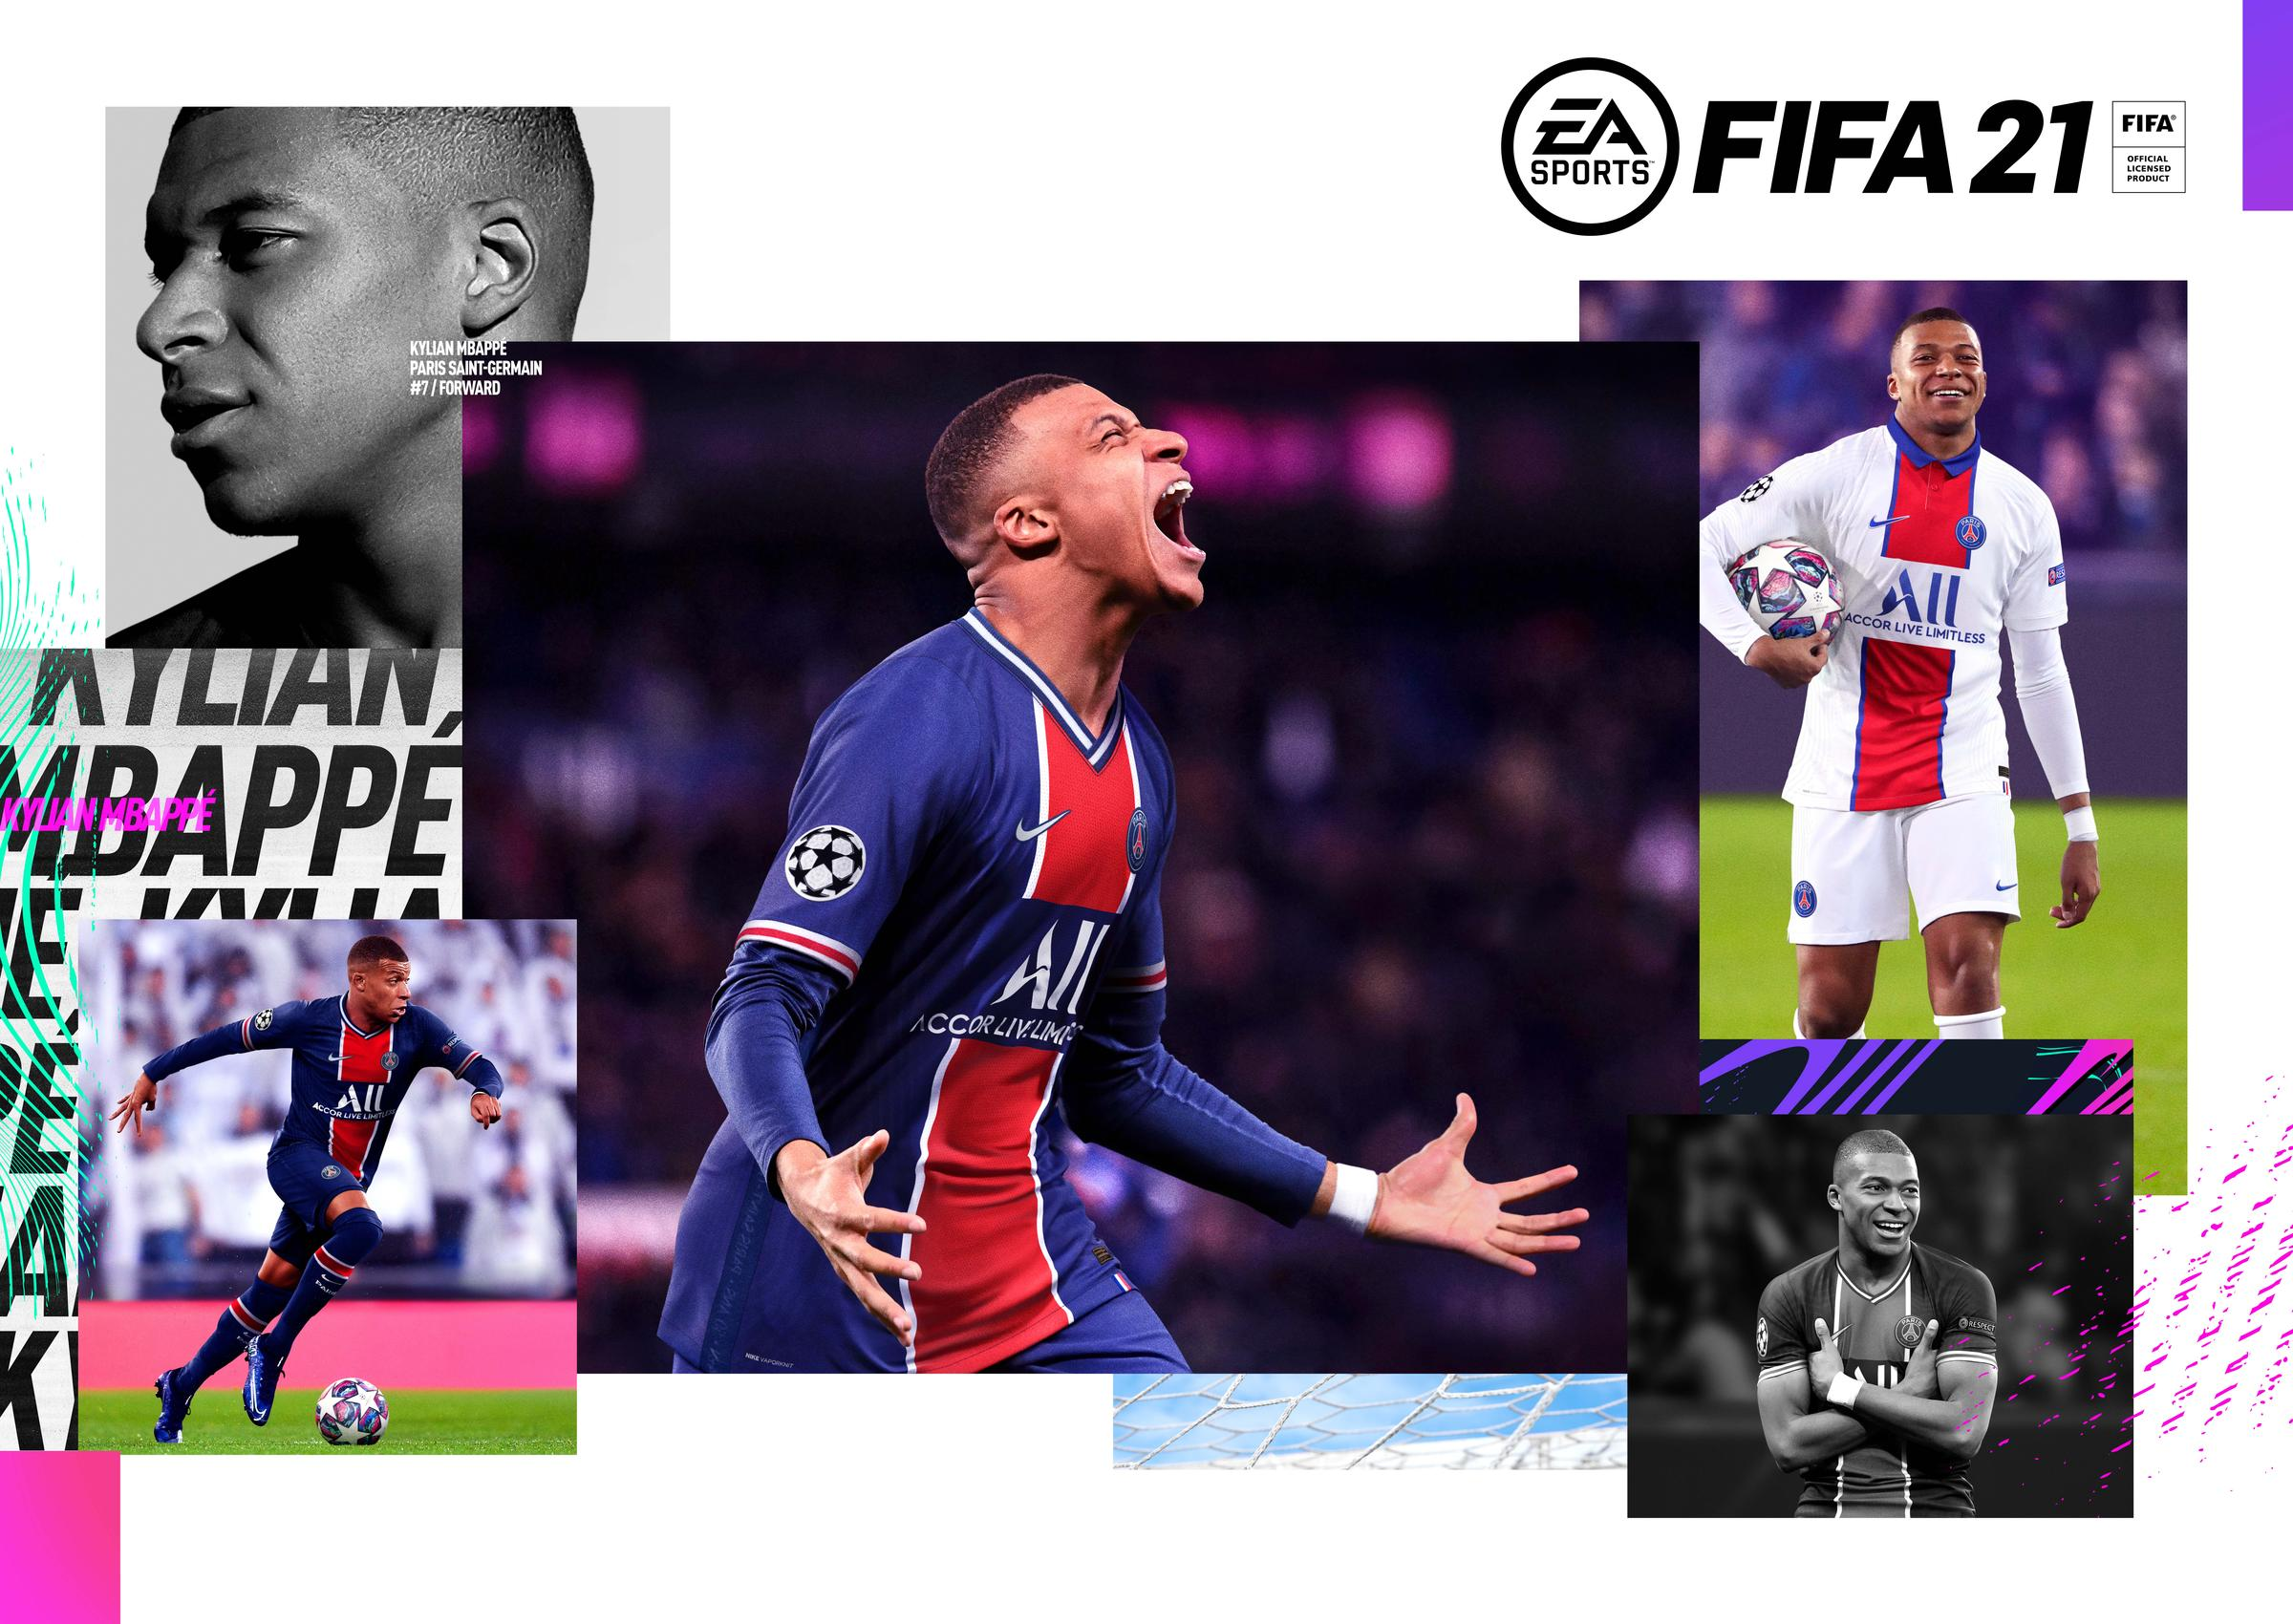 Kylian Mbappe Will Supposedly Be On The Cover Of FIFA 21